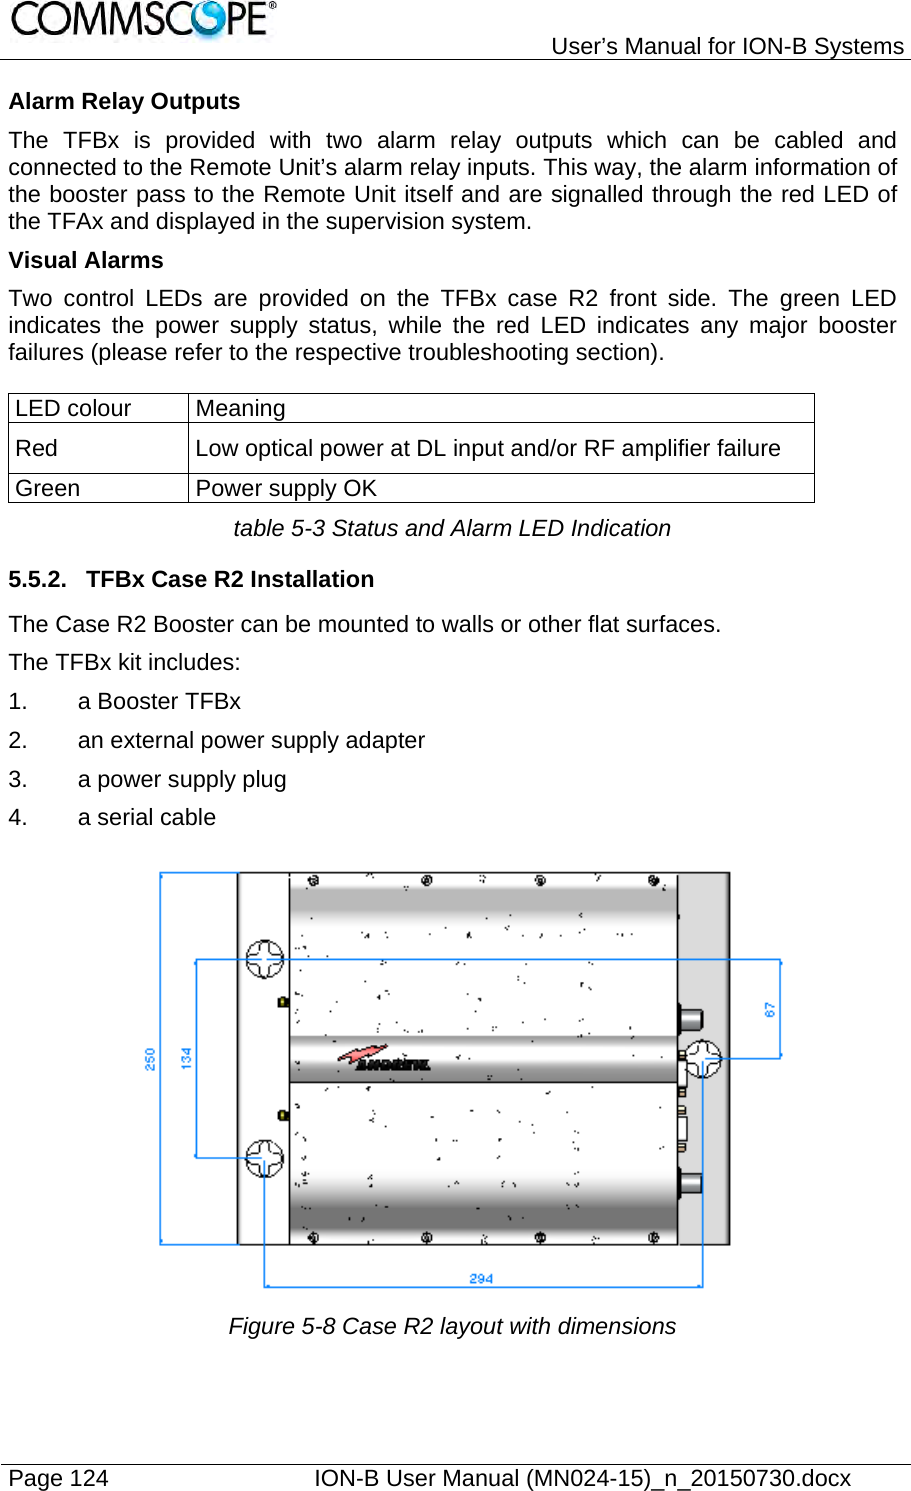   User’s Manual for ION-B Systems Page 124    ION-B User Manual (MN024-15)_n_20150730.docx  Alarm Relay Outputs The TFBx is provided with two alarm relay outputs which can be cabled and connected to the Remote Unit’s alarm relay inputs. This way, the alarm information of the booster pass to the Remote Unit itself and are signalled through the red LED of the TFAx and displayed in the supervision system. Visual Alarms Two control LEDs are provided on the TFBx case R2 front side. The green LED indicates the power supply status, while the red LED indicates any major booster failures (please refer to the respective troubleshooting section).   LED colour  Meaning Red  Low optical power at DL input and/or RF amplifier failure Green  Power supply OK table 5-3 Status and Alarm LED Indication 5.5.2.  TFBx Case R2 Installation The Case R2 Booster can be mounted to walls or other flat surfaces. The TFBx kit includes: 1.  a Booster TFBx 2.  an external power supply adapter 3.  a power supply plug 4.  a serial cable    Figure 5-8 Case R2 layout with dimensions  